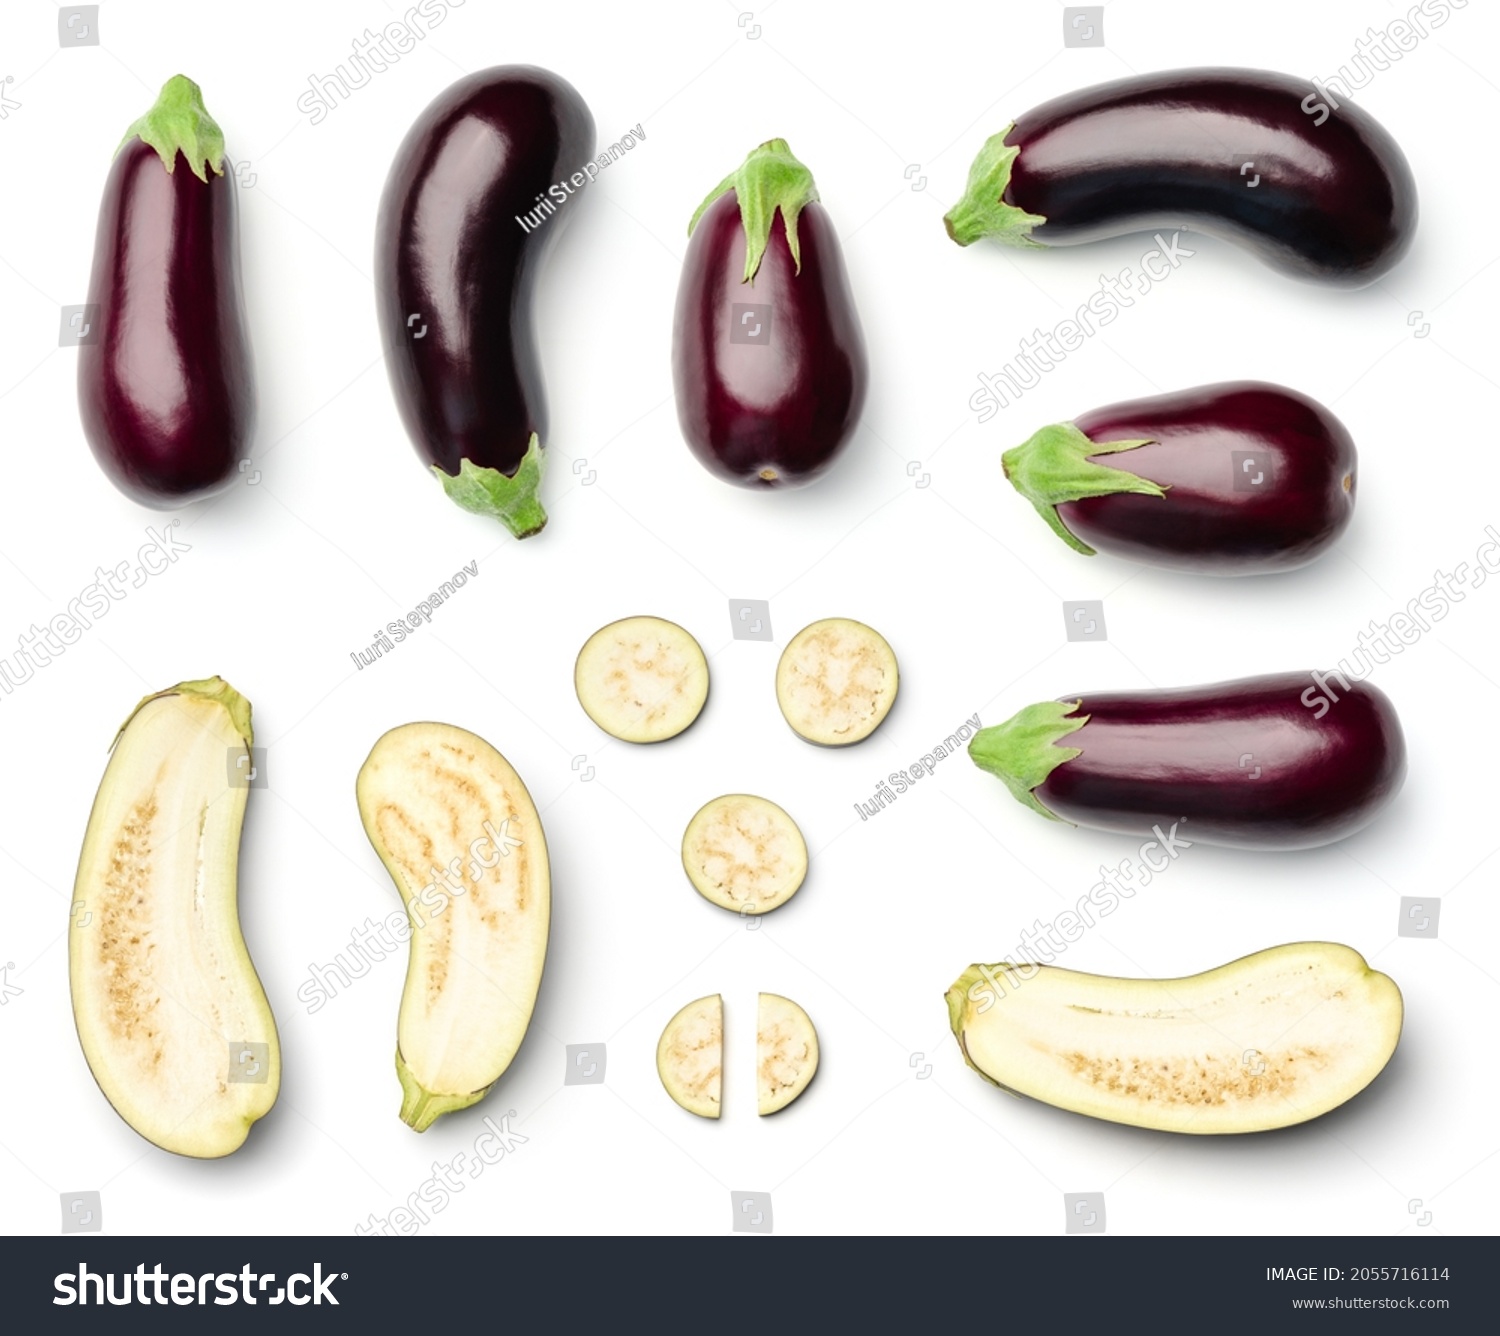 Collection of eggplant isolated on white background. Set of multiple images. Part of series #2055716114